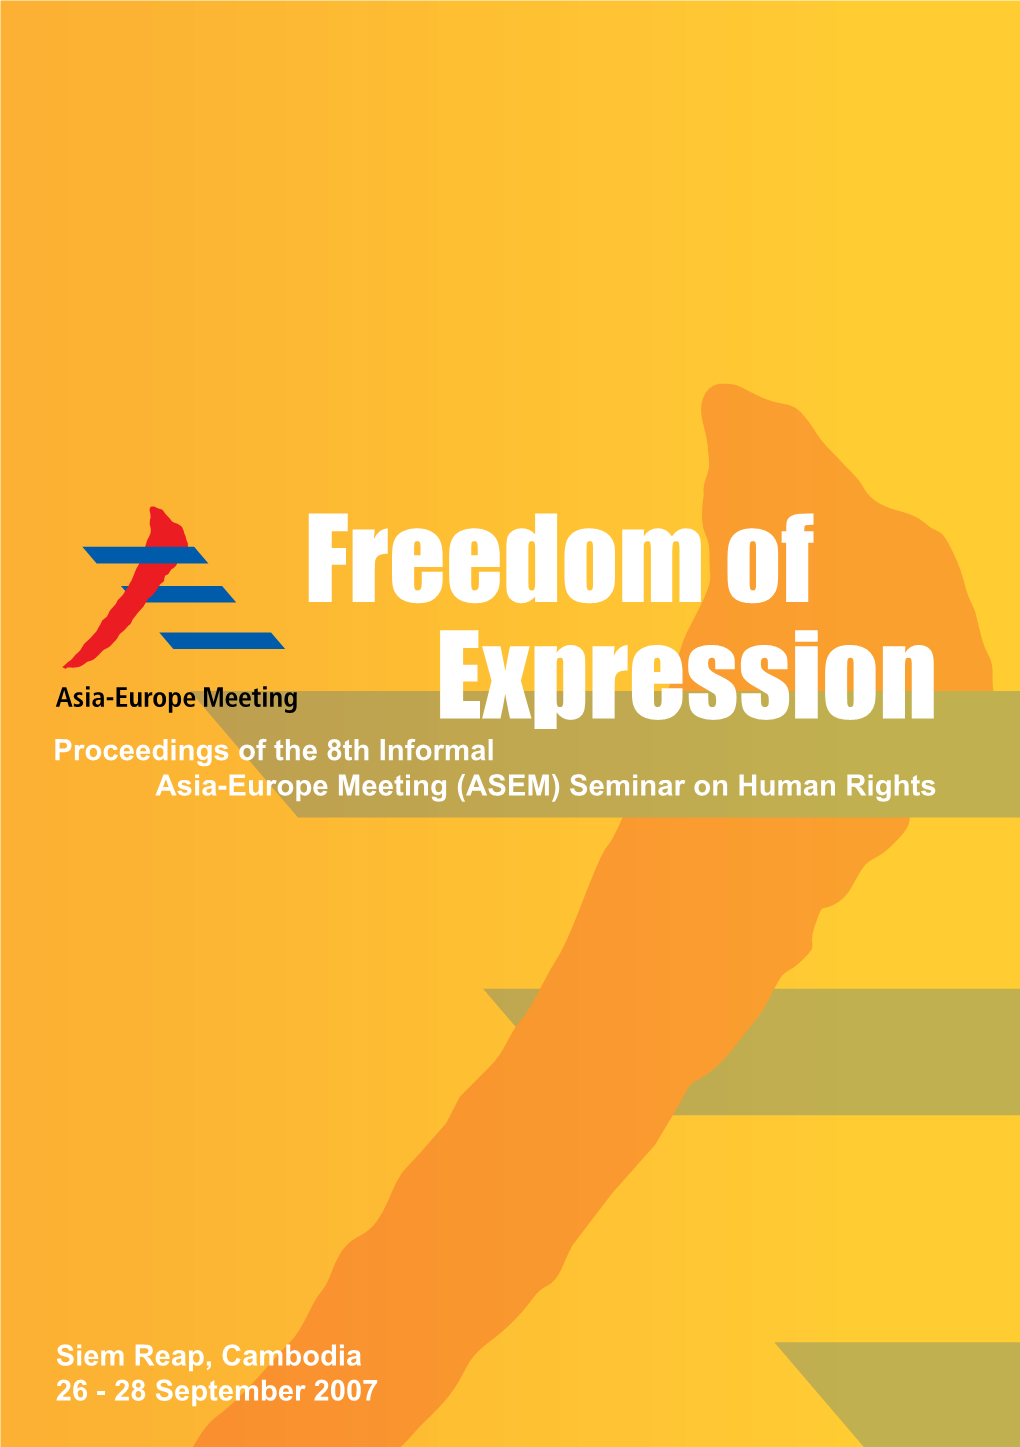 Freedom of Expression Proceedings of the 8Th Informal Asia-Europe Meeting (ASEM) Seminar on Human Rights